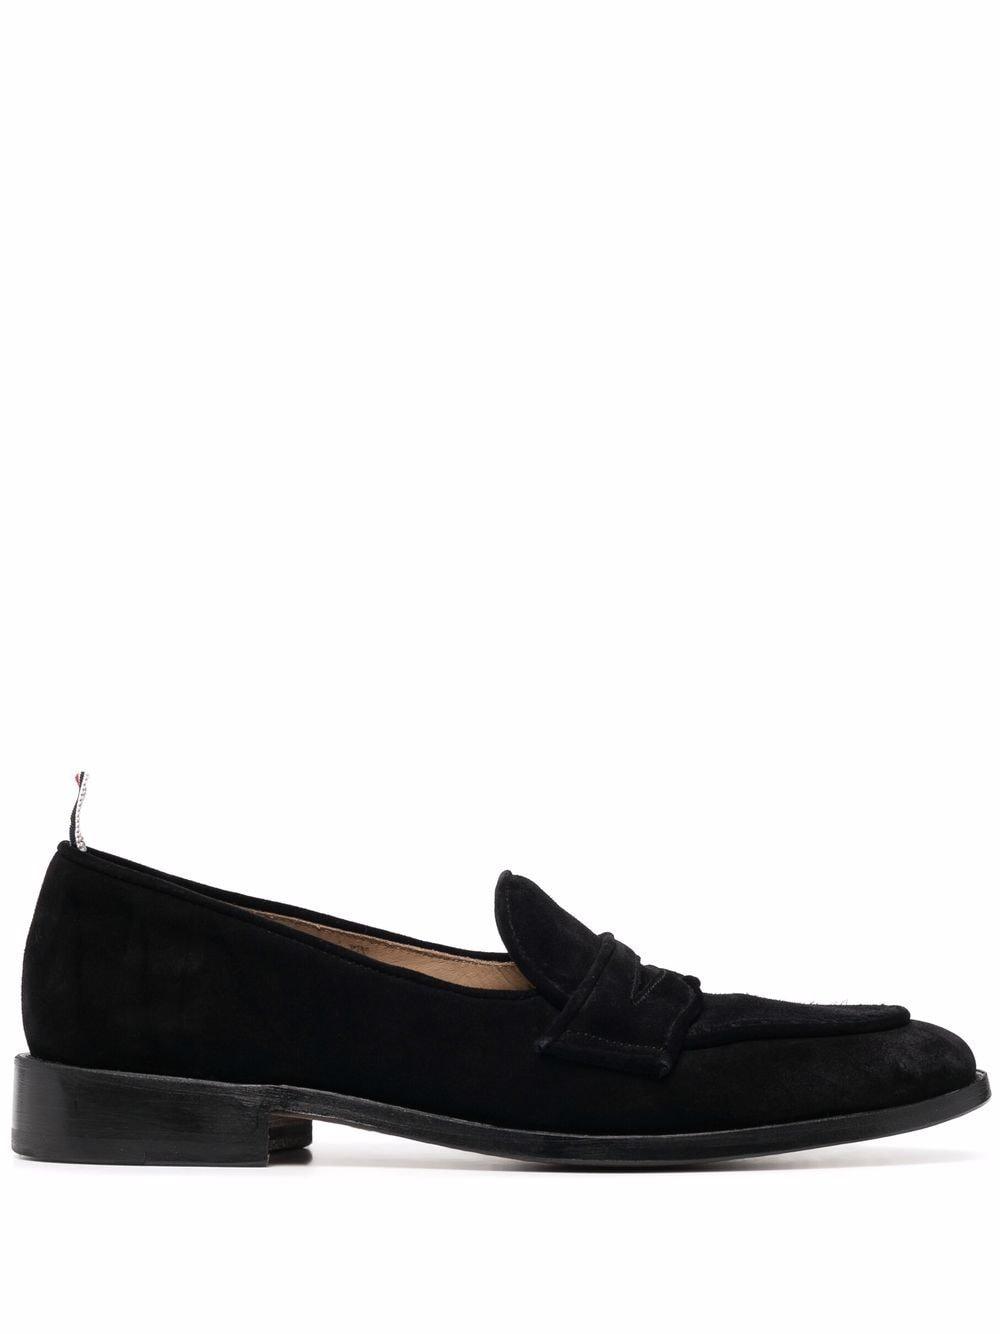 Thom Browne Varsity Penny-strap Loafers in Black for Men | Lyst